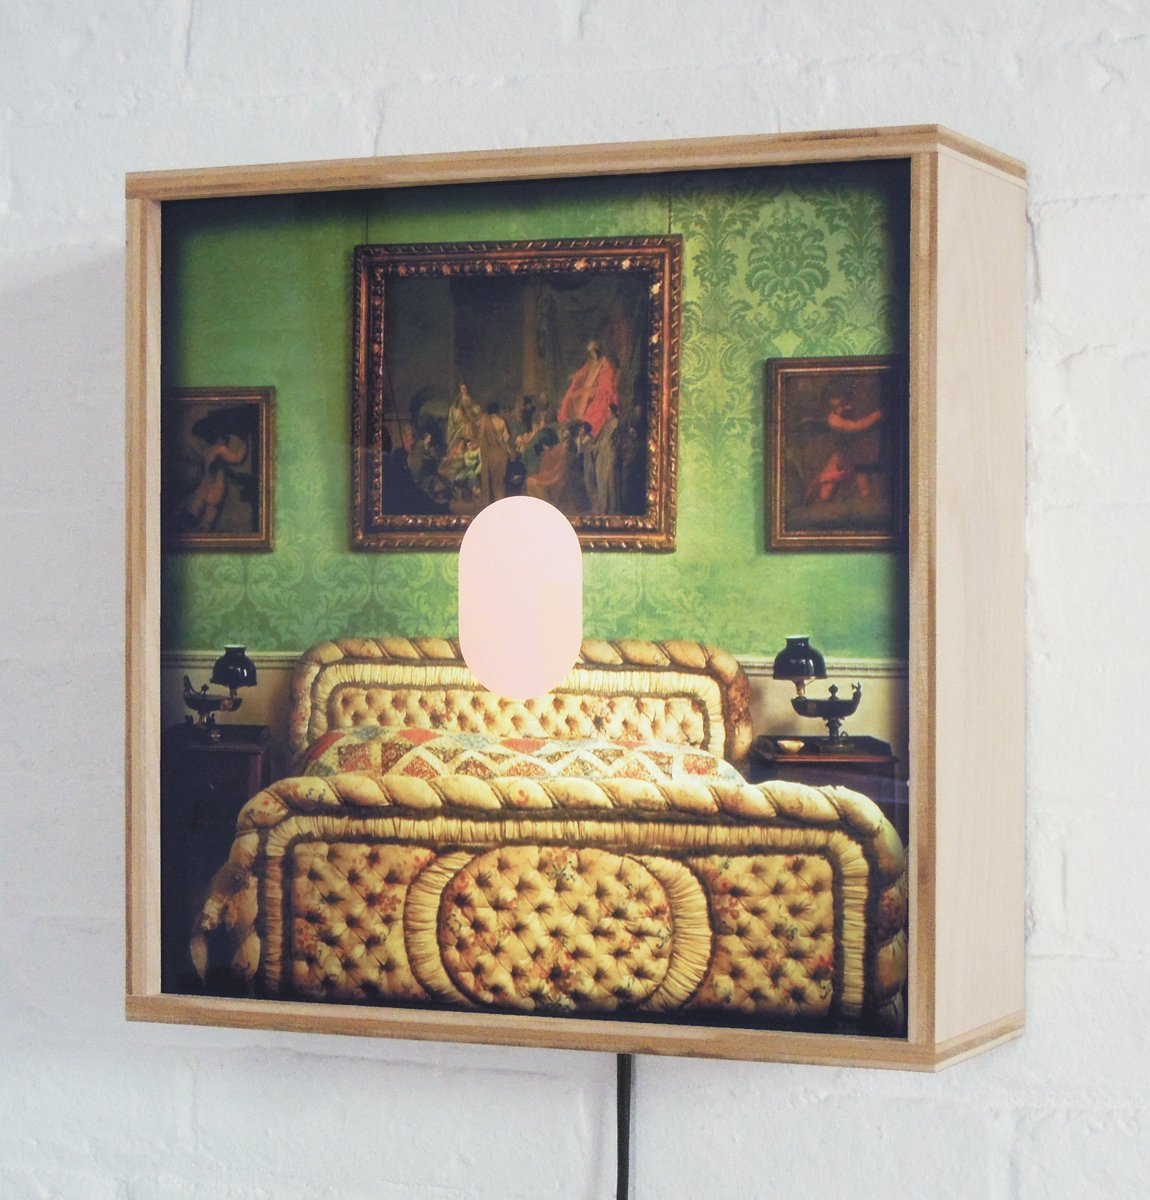 A plywood lightbox contains an image of an opulent bedroom and a pink oval.